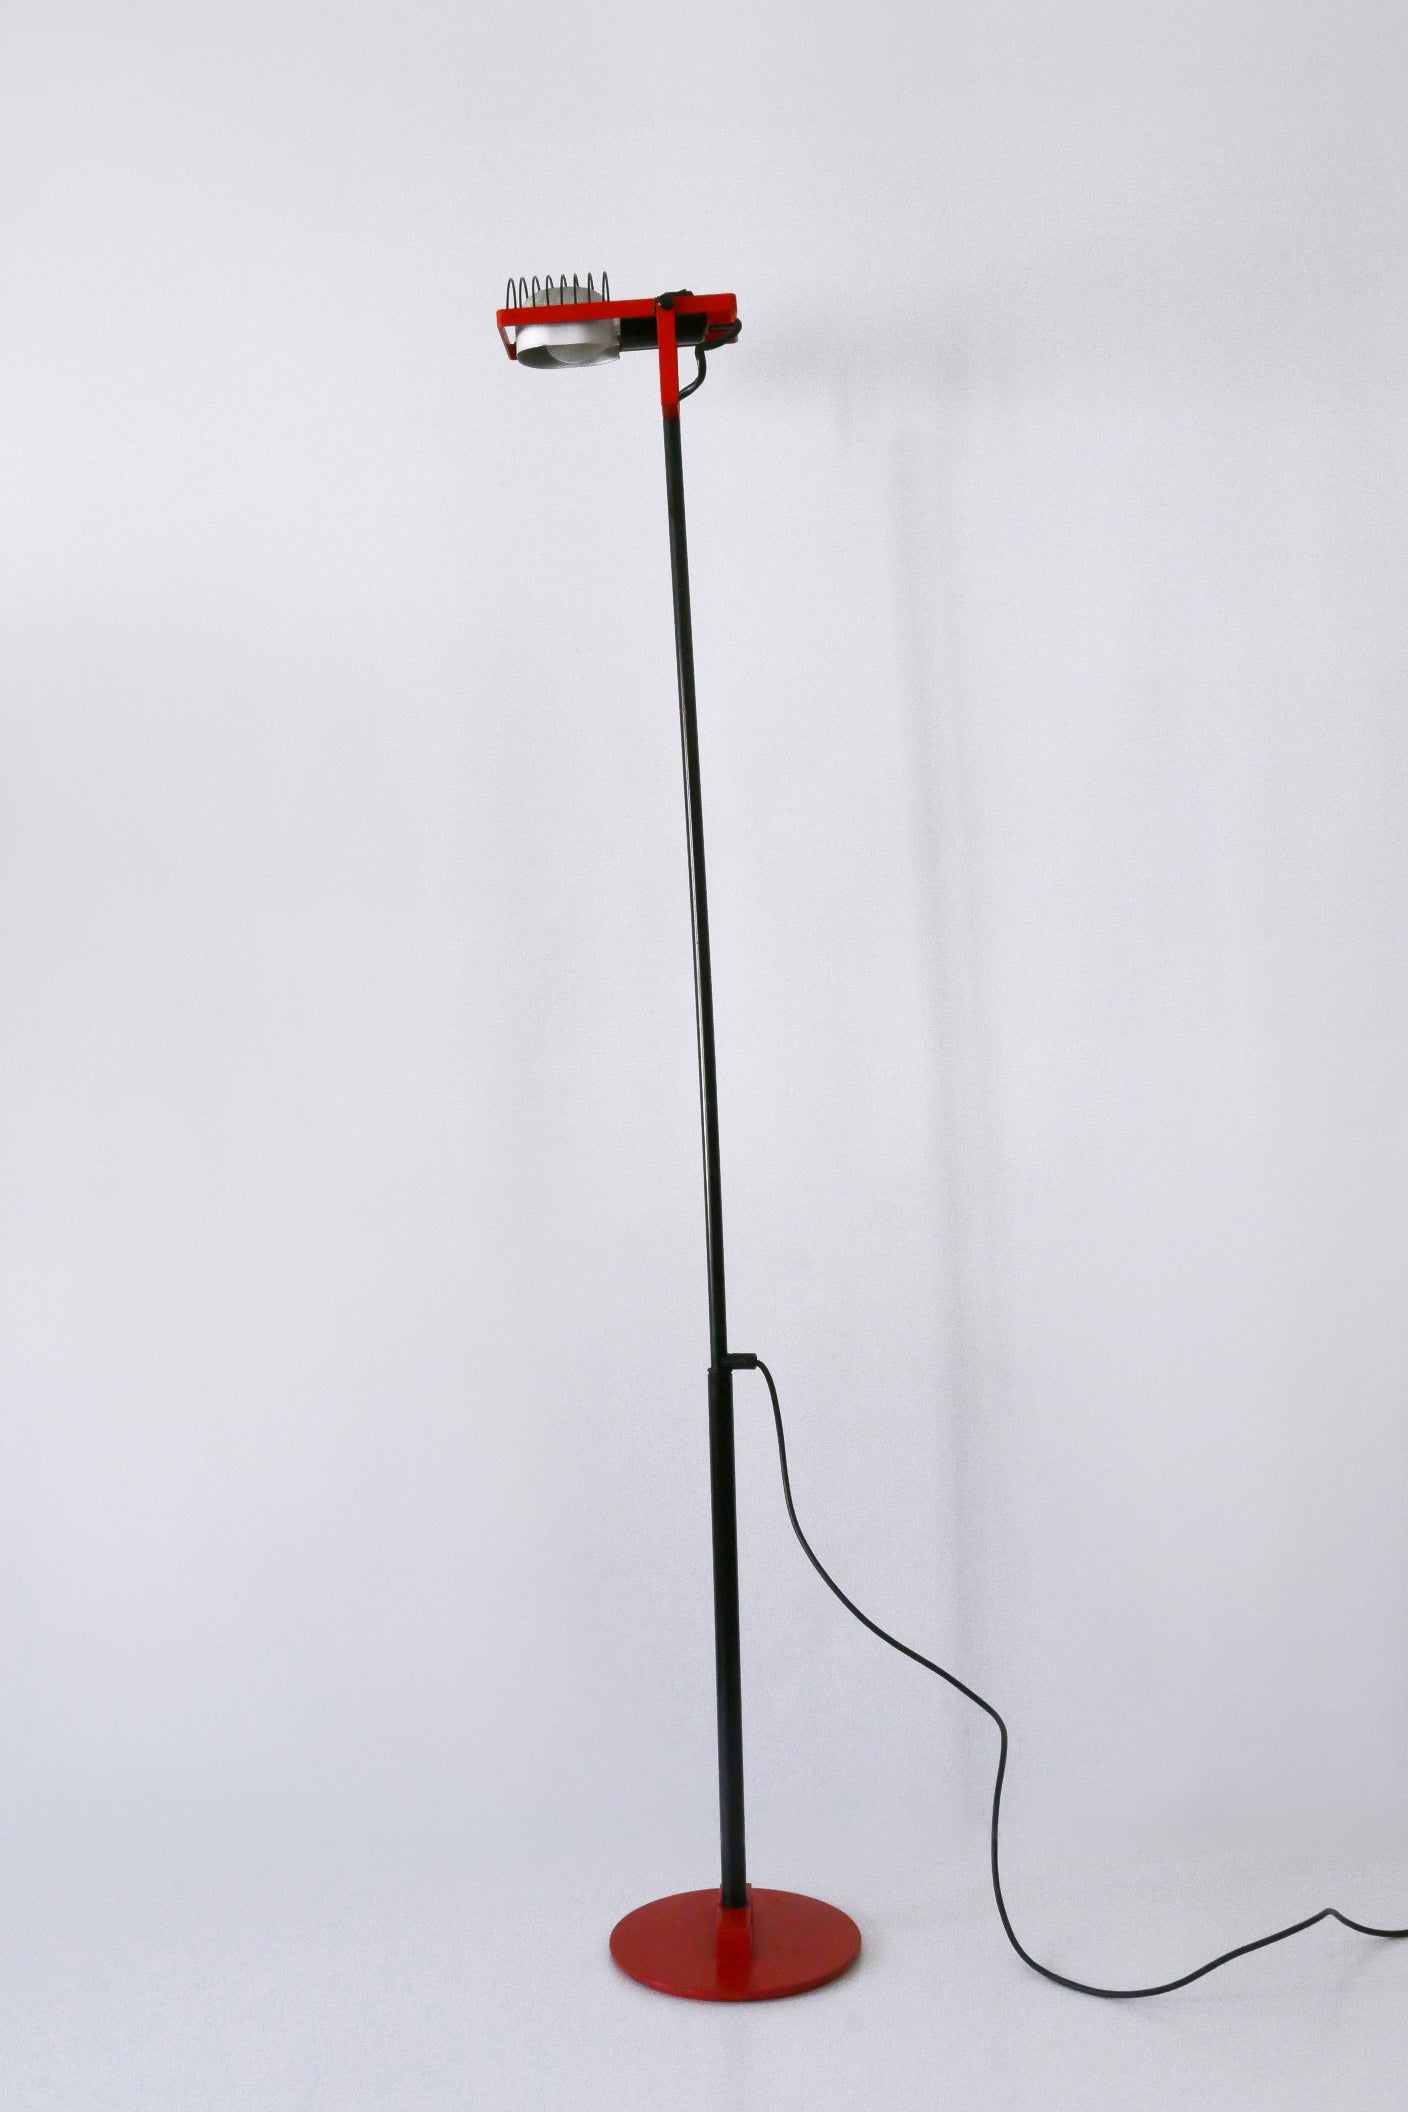 Vintage telescopic and rotating floor lamp or reading light 'Sintesi'. Adjustable in vertically and horizontally. Designed by Ernesto Gismondi for Artelmide, Italy, 1970s. Makers mark beneath the base.

Executed in black, red and silver enameled